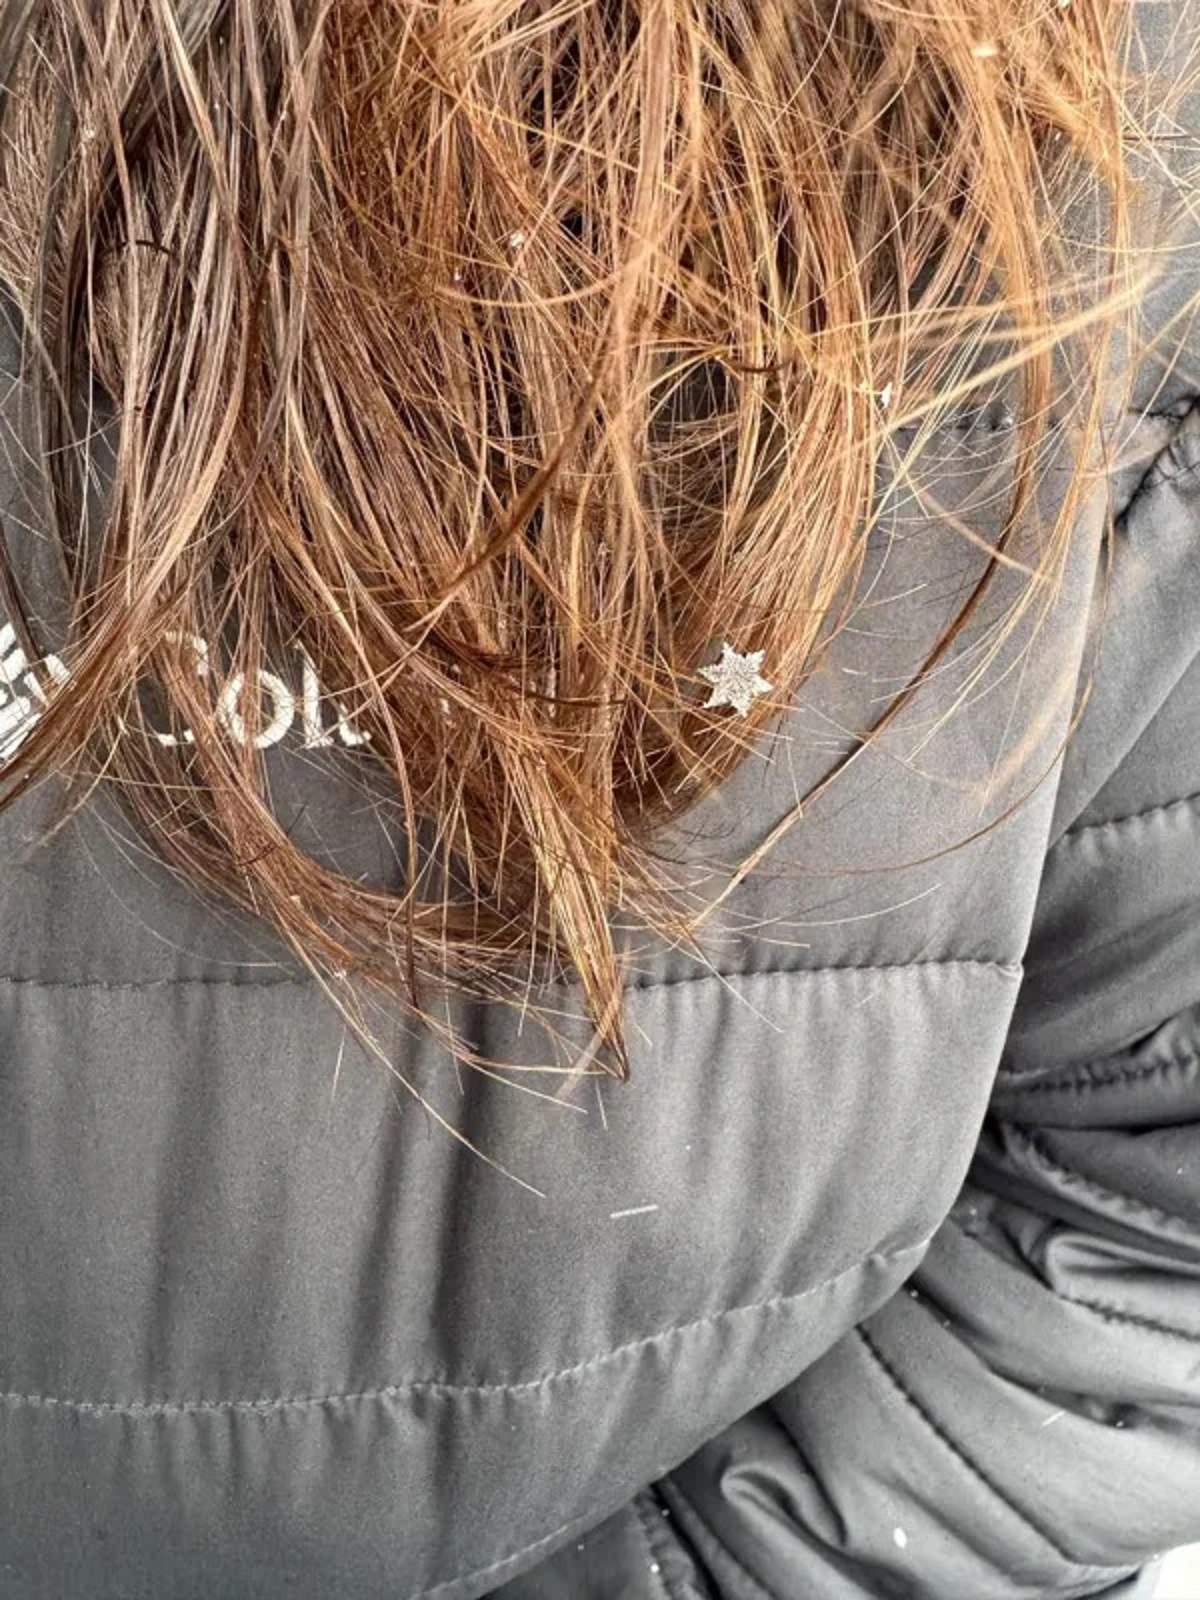 This perfect snowflake that landed on my wife’s hair this morning.